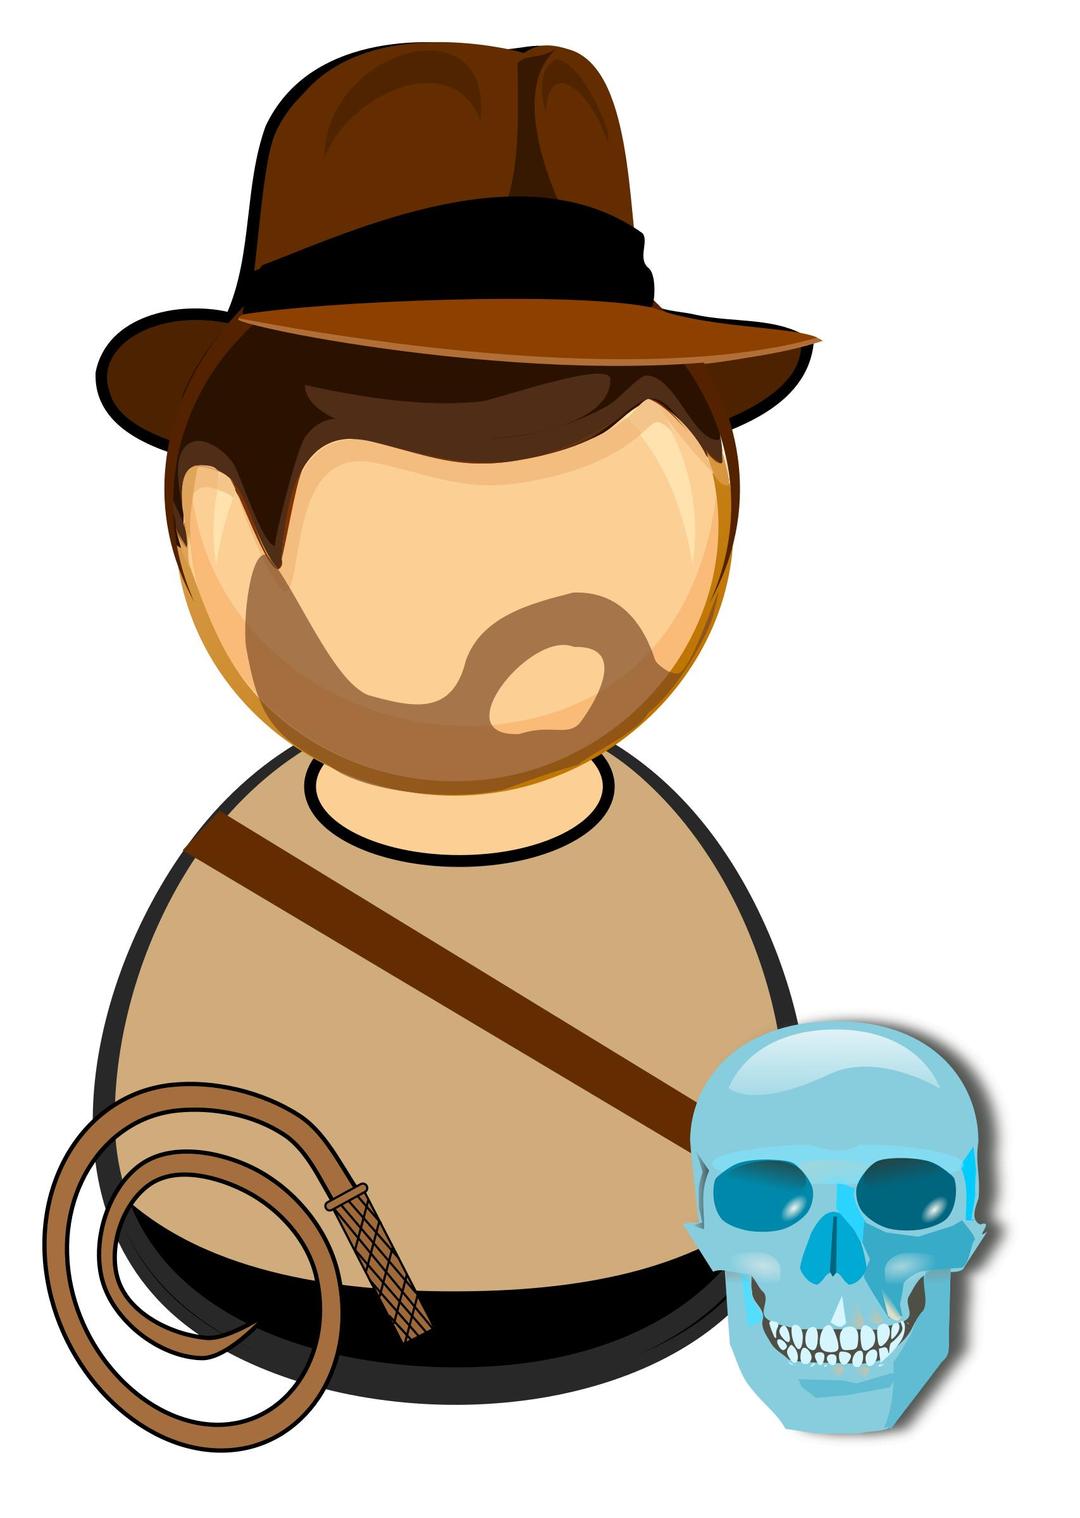 Adventurer in a hat, with a whip and glass skull png transparent